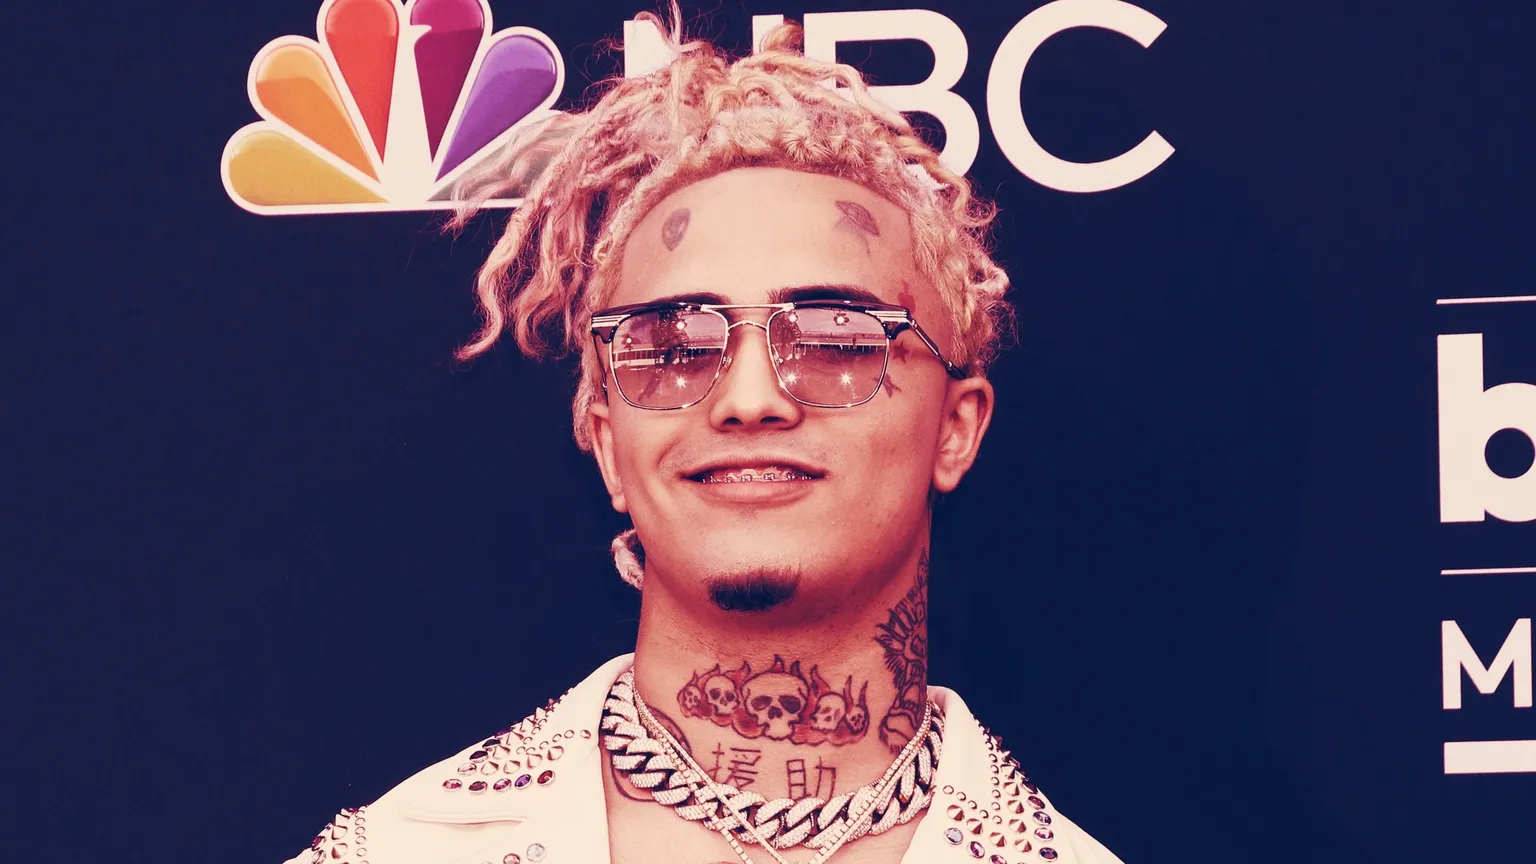 Lil Pump is getting his own cryptocurrency. Image: Shutterstock